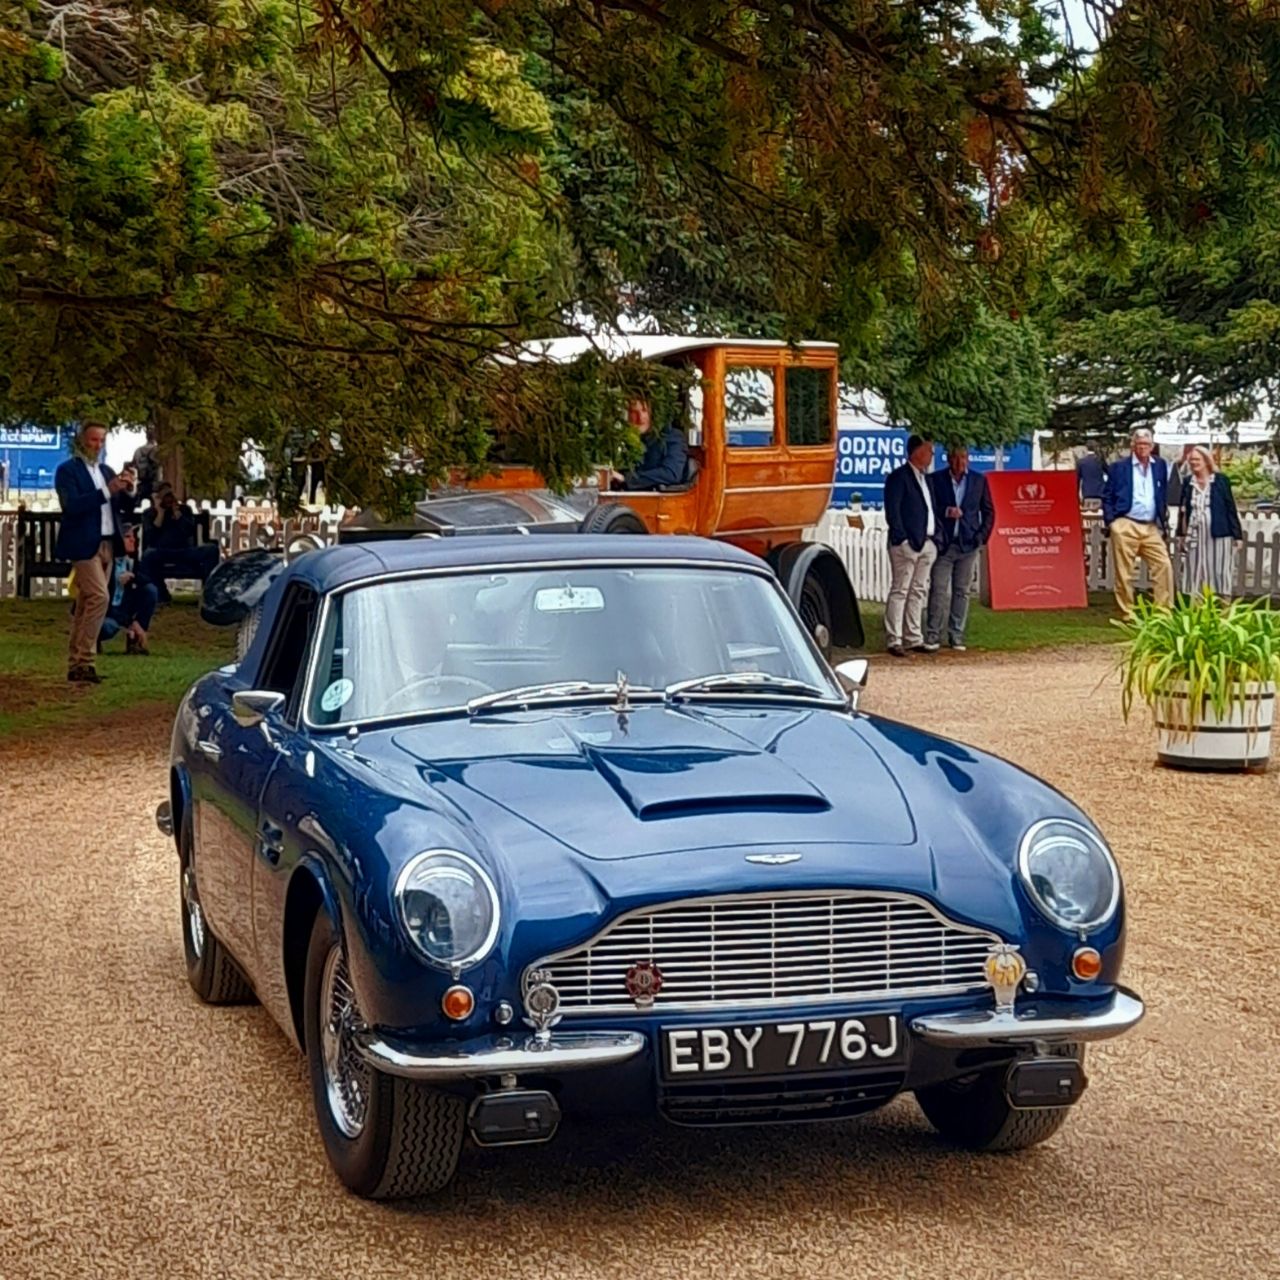 Some of the very best classic Aston Martin motorcars on display at Hampton Court Palace yesterday.